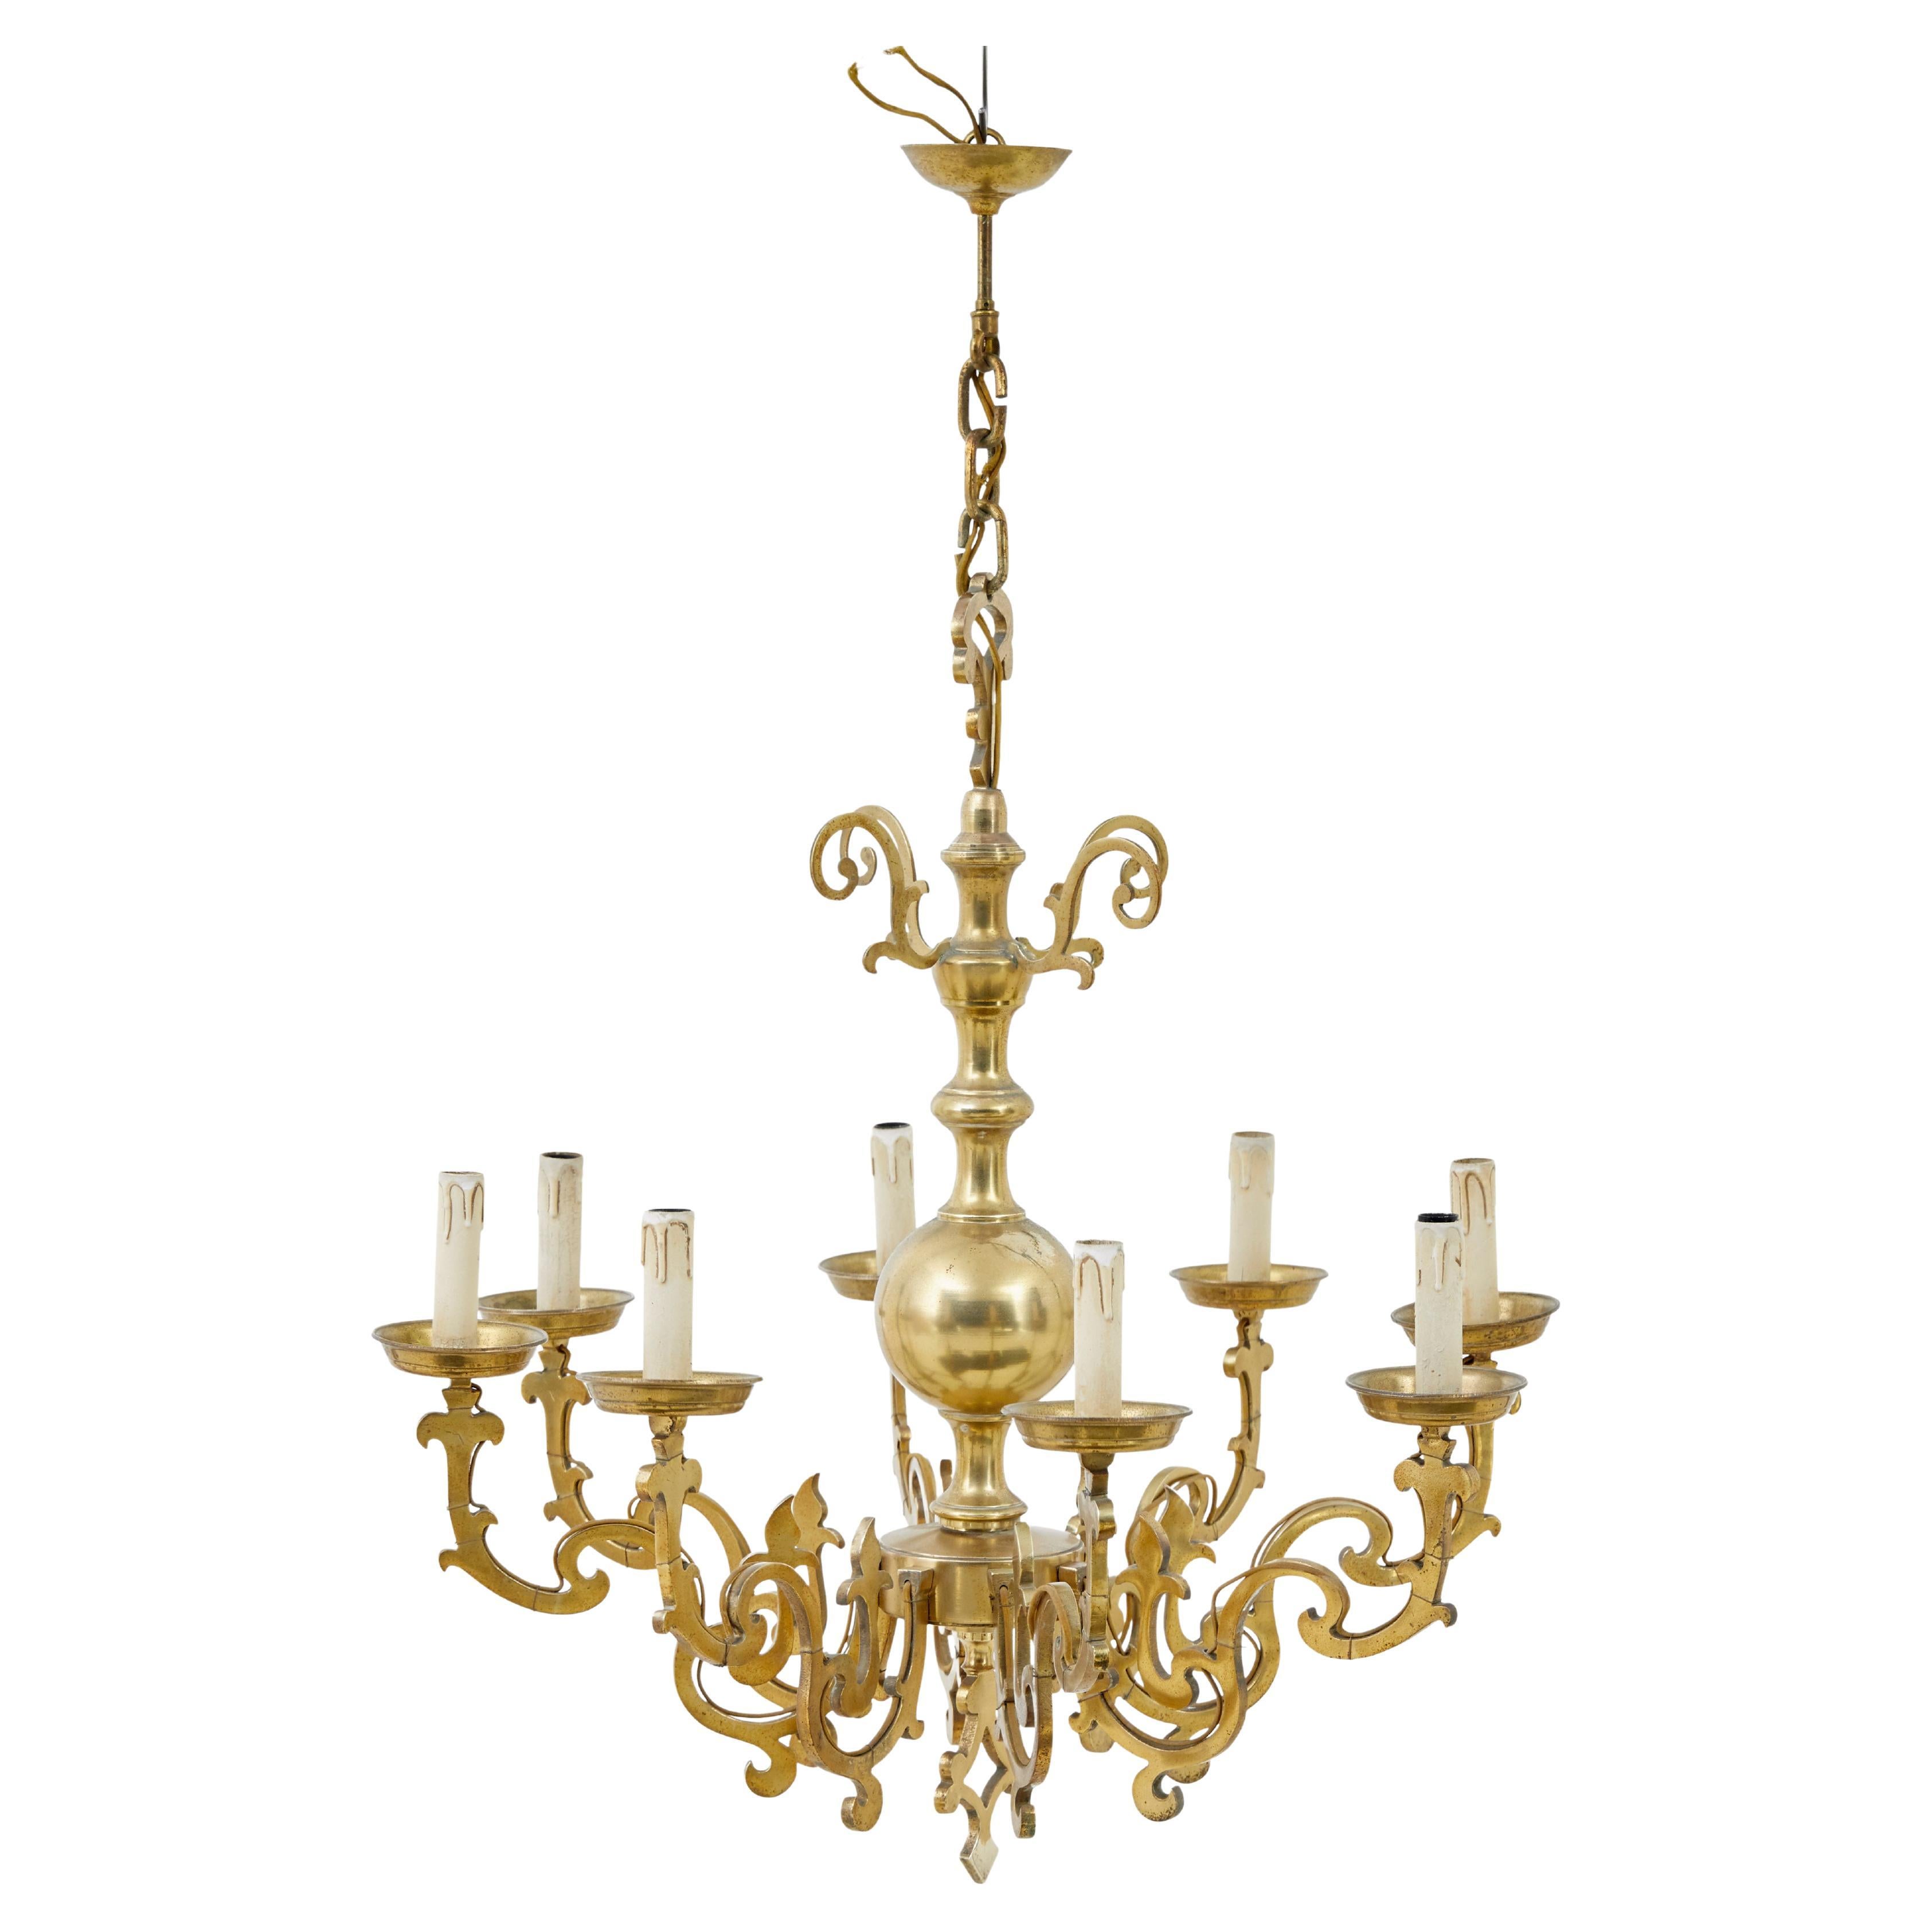 Large early 20th century 8 arm brass chandelier For Sale